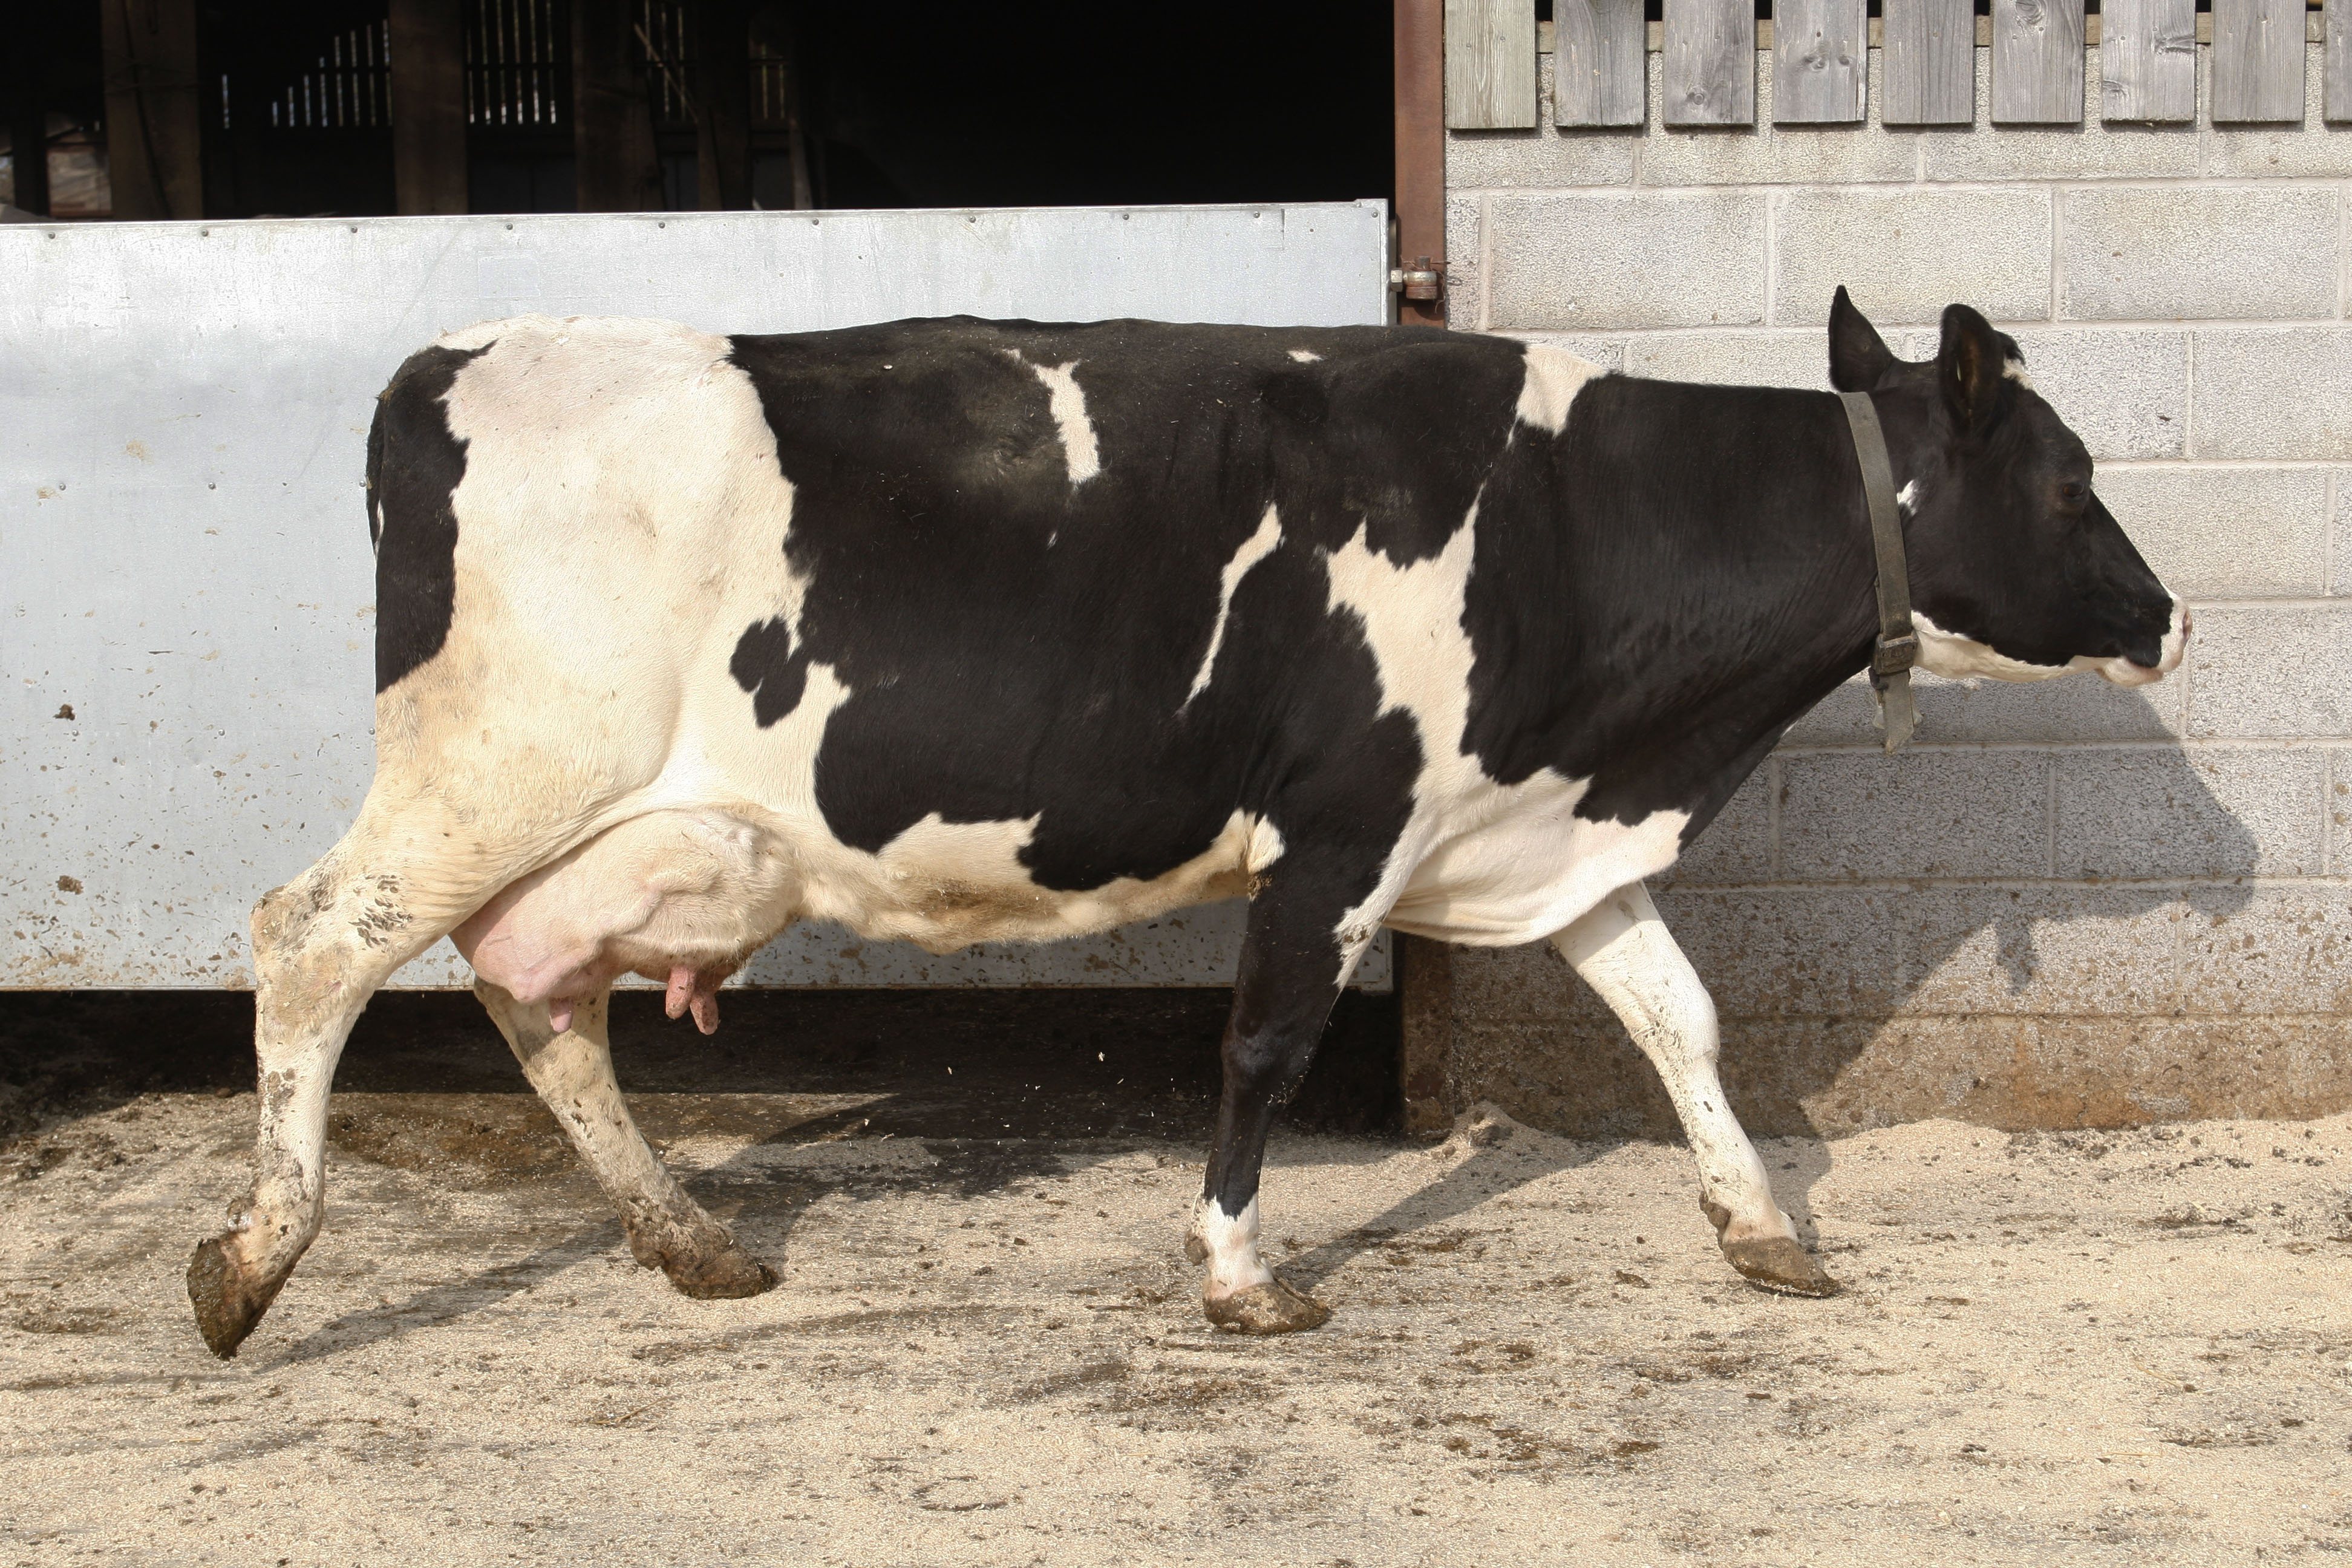 Example of a dairy cow with good mobility. Would score 0 on the mobility scale.